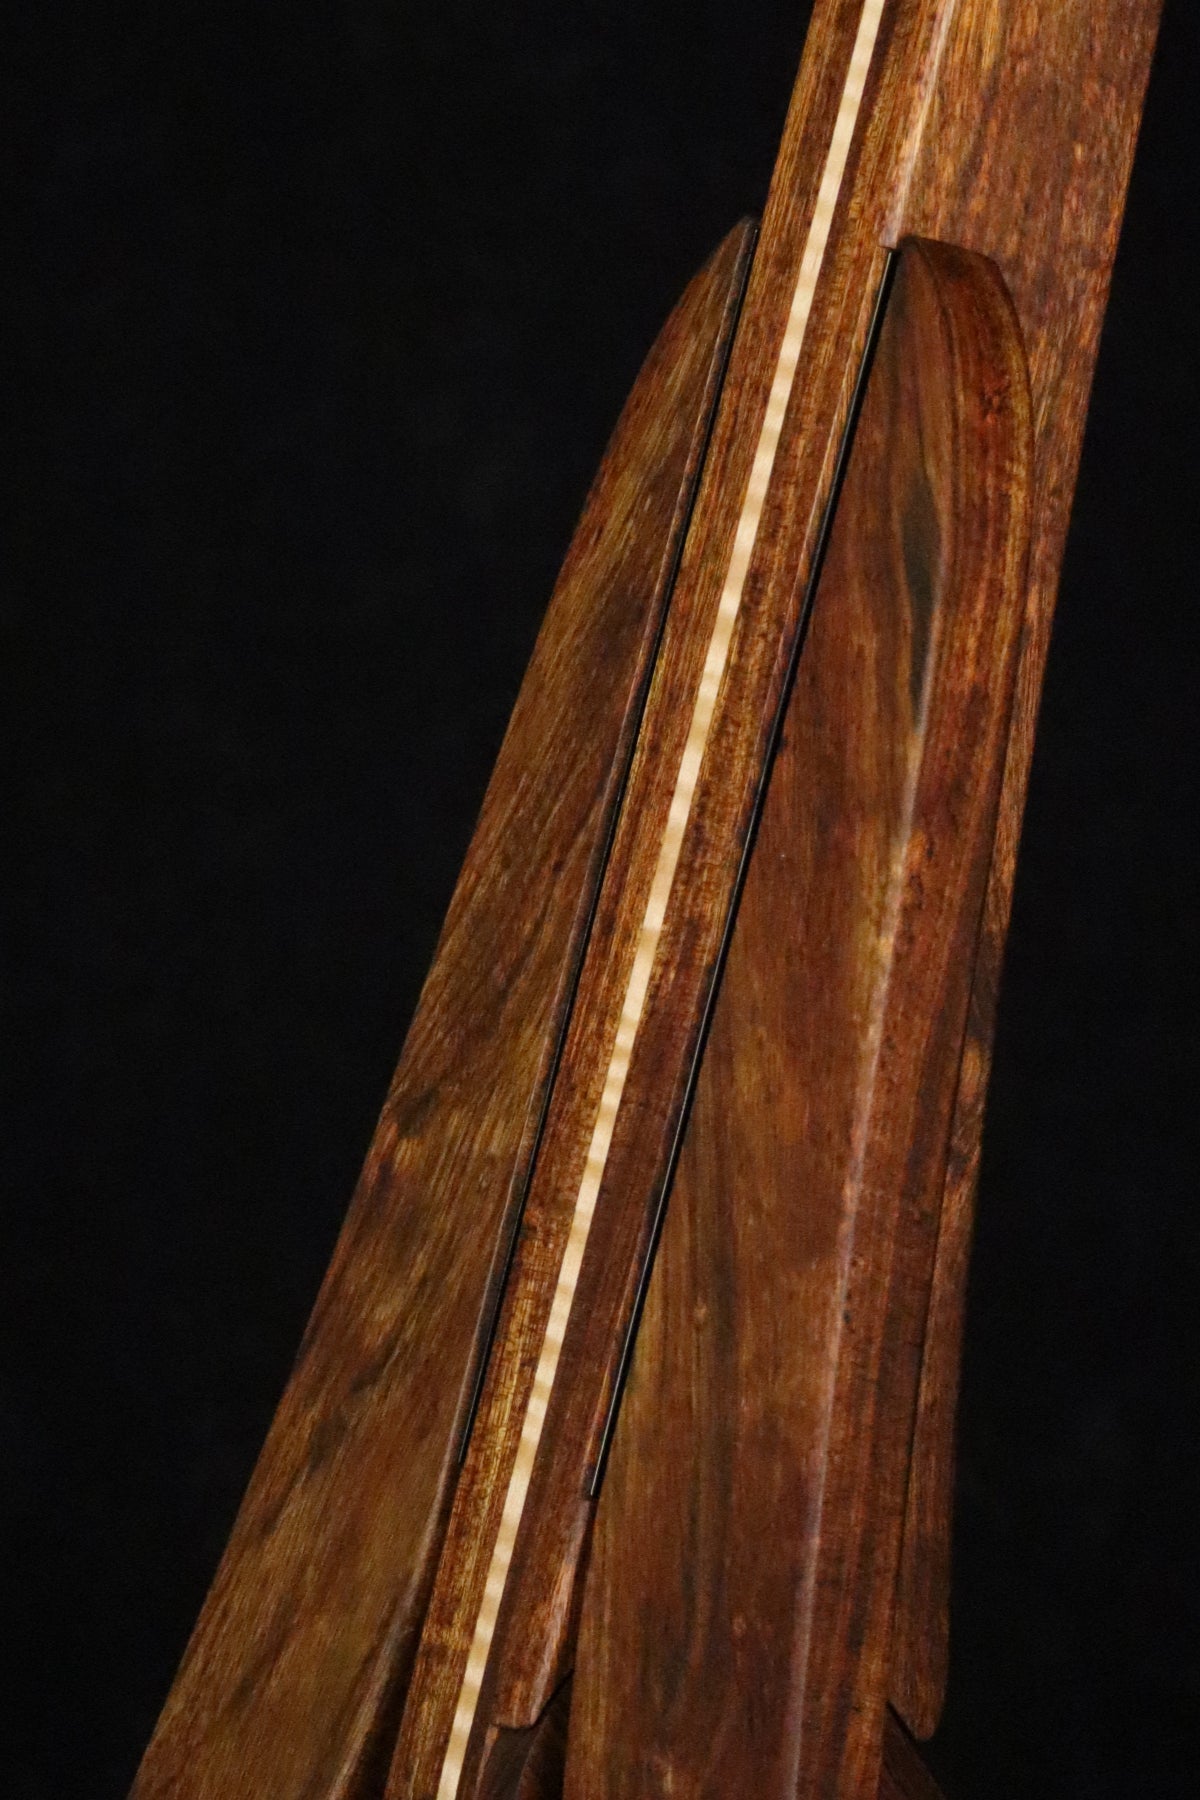 Folding chechen Caribbean rosewood and curly maple wood electric bass guitar floor stand closeup front image